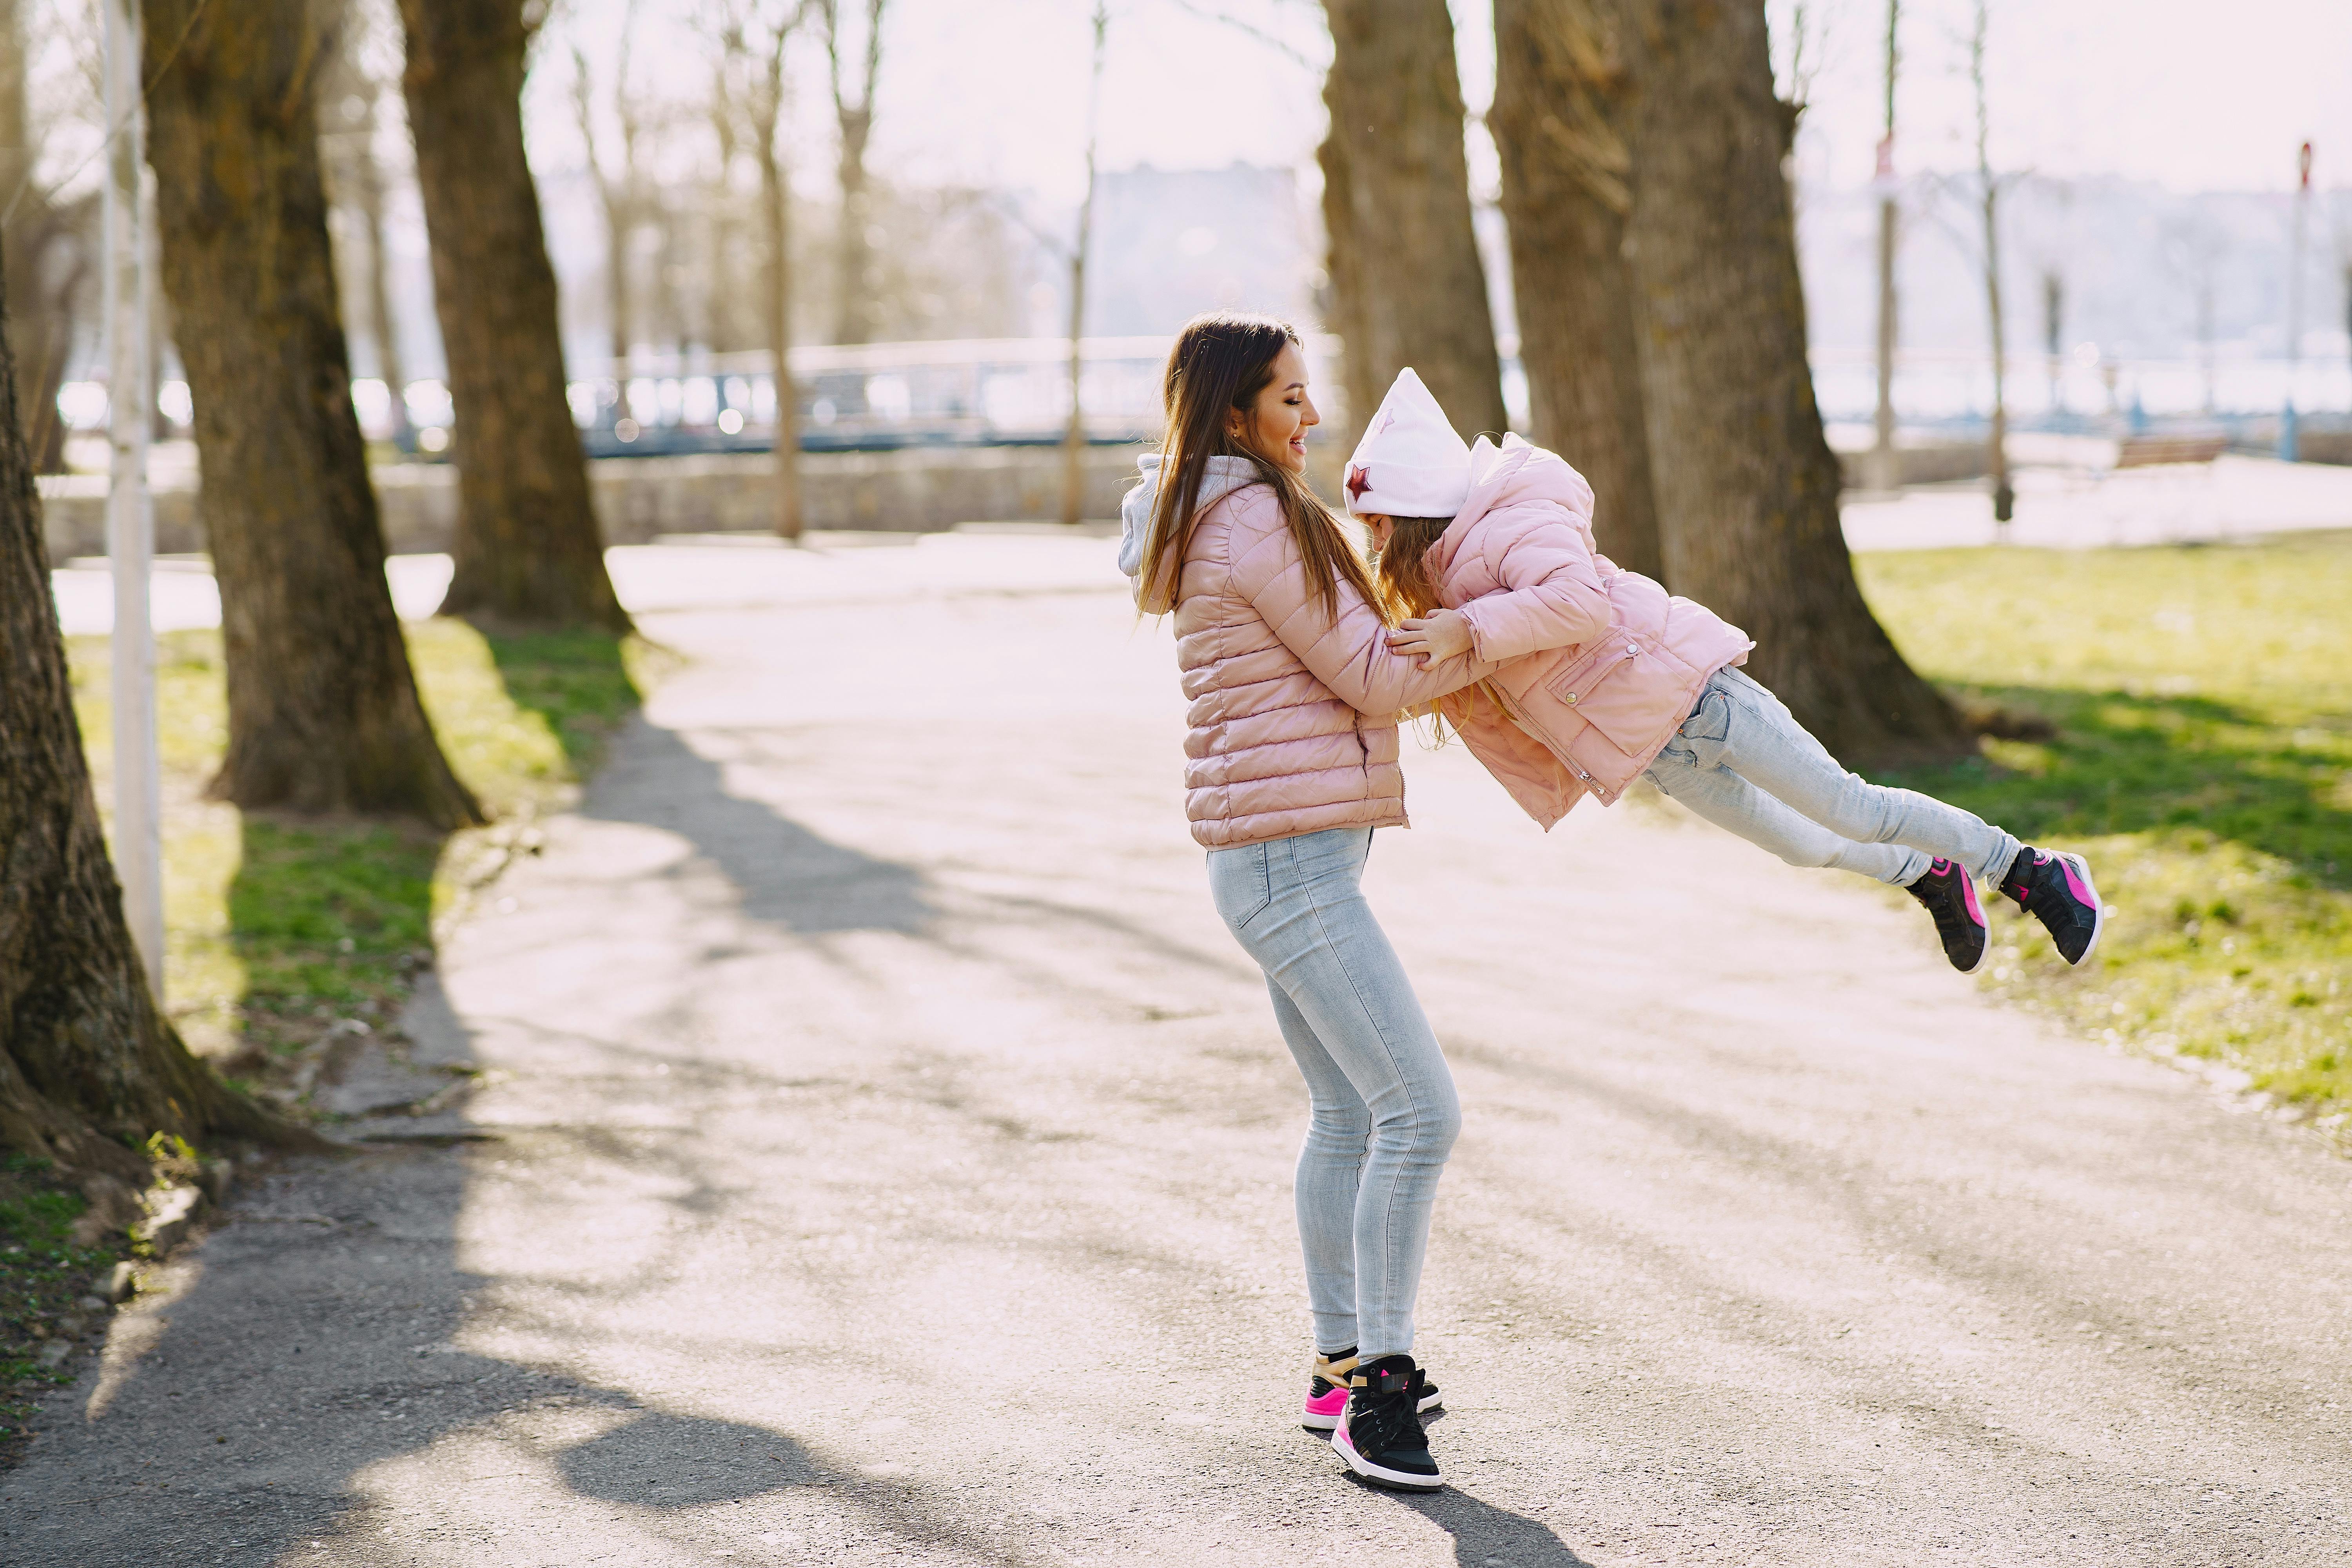 Mother and daughter having fun in the park | Source: Pexels